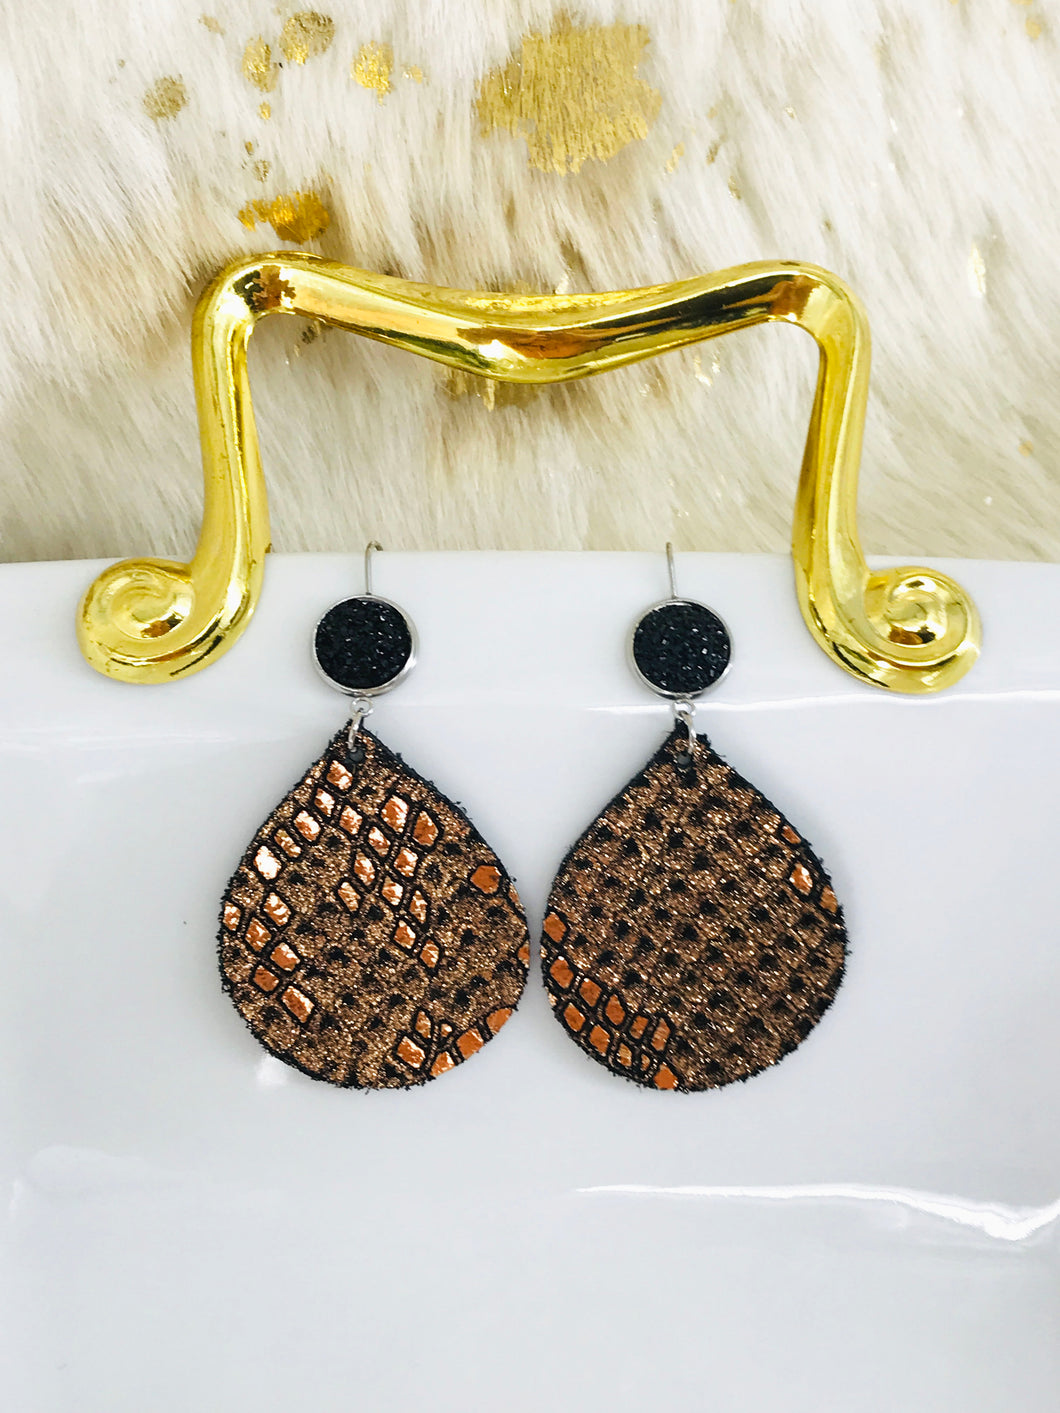 Druzy Agate and Genuine Leather Earrings - E19-2911